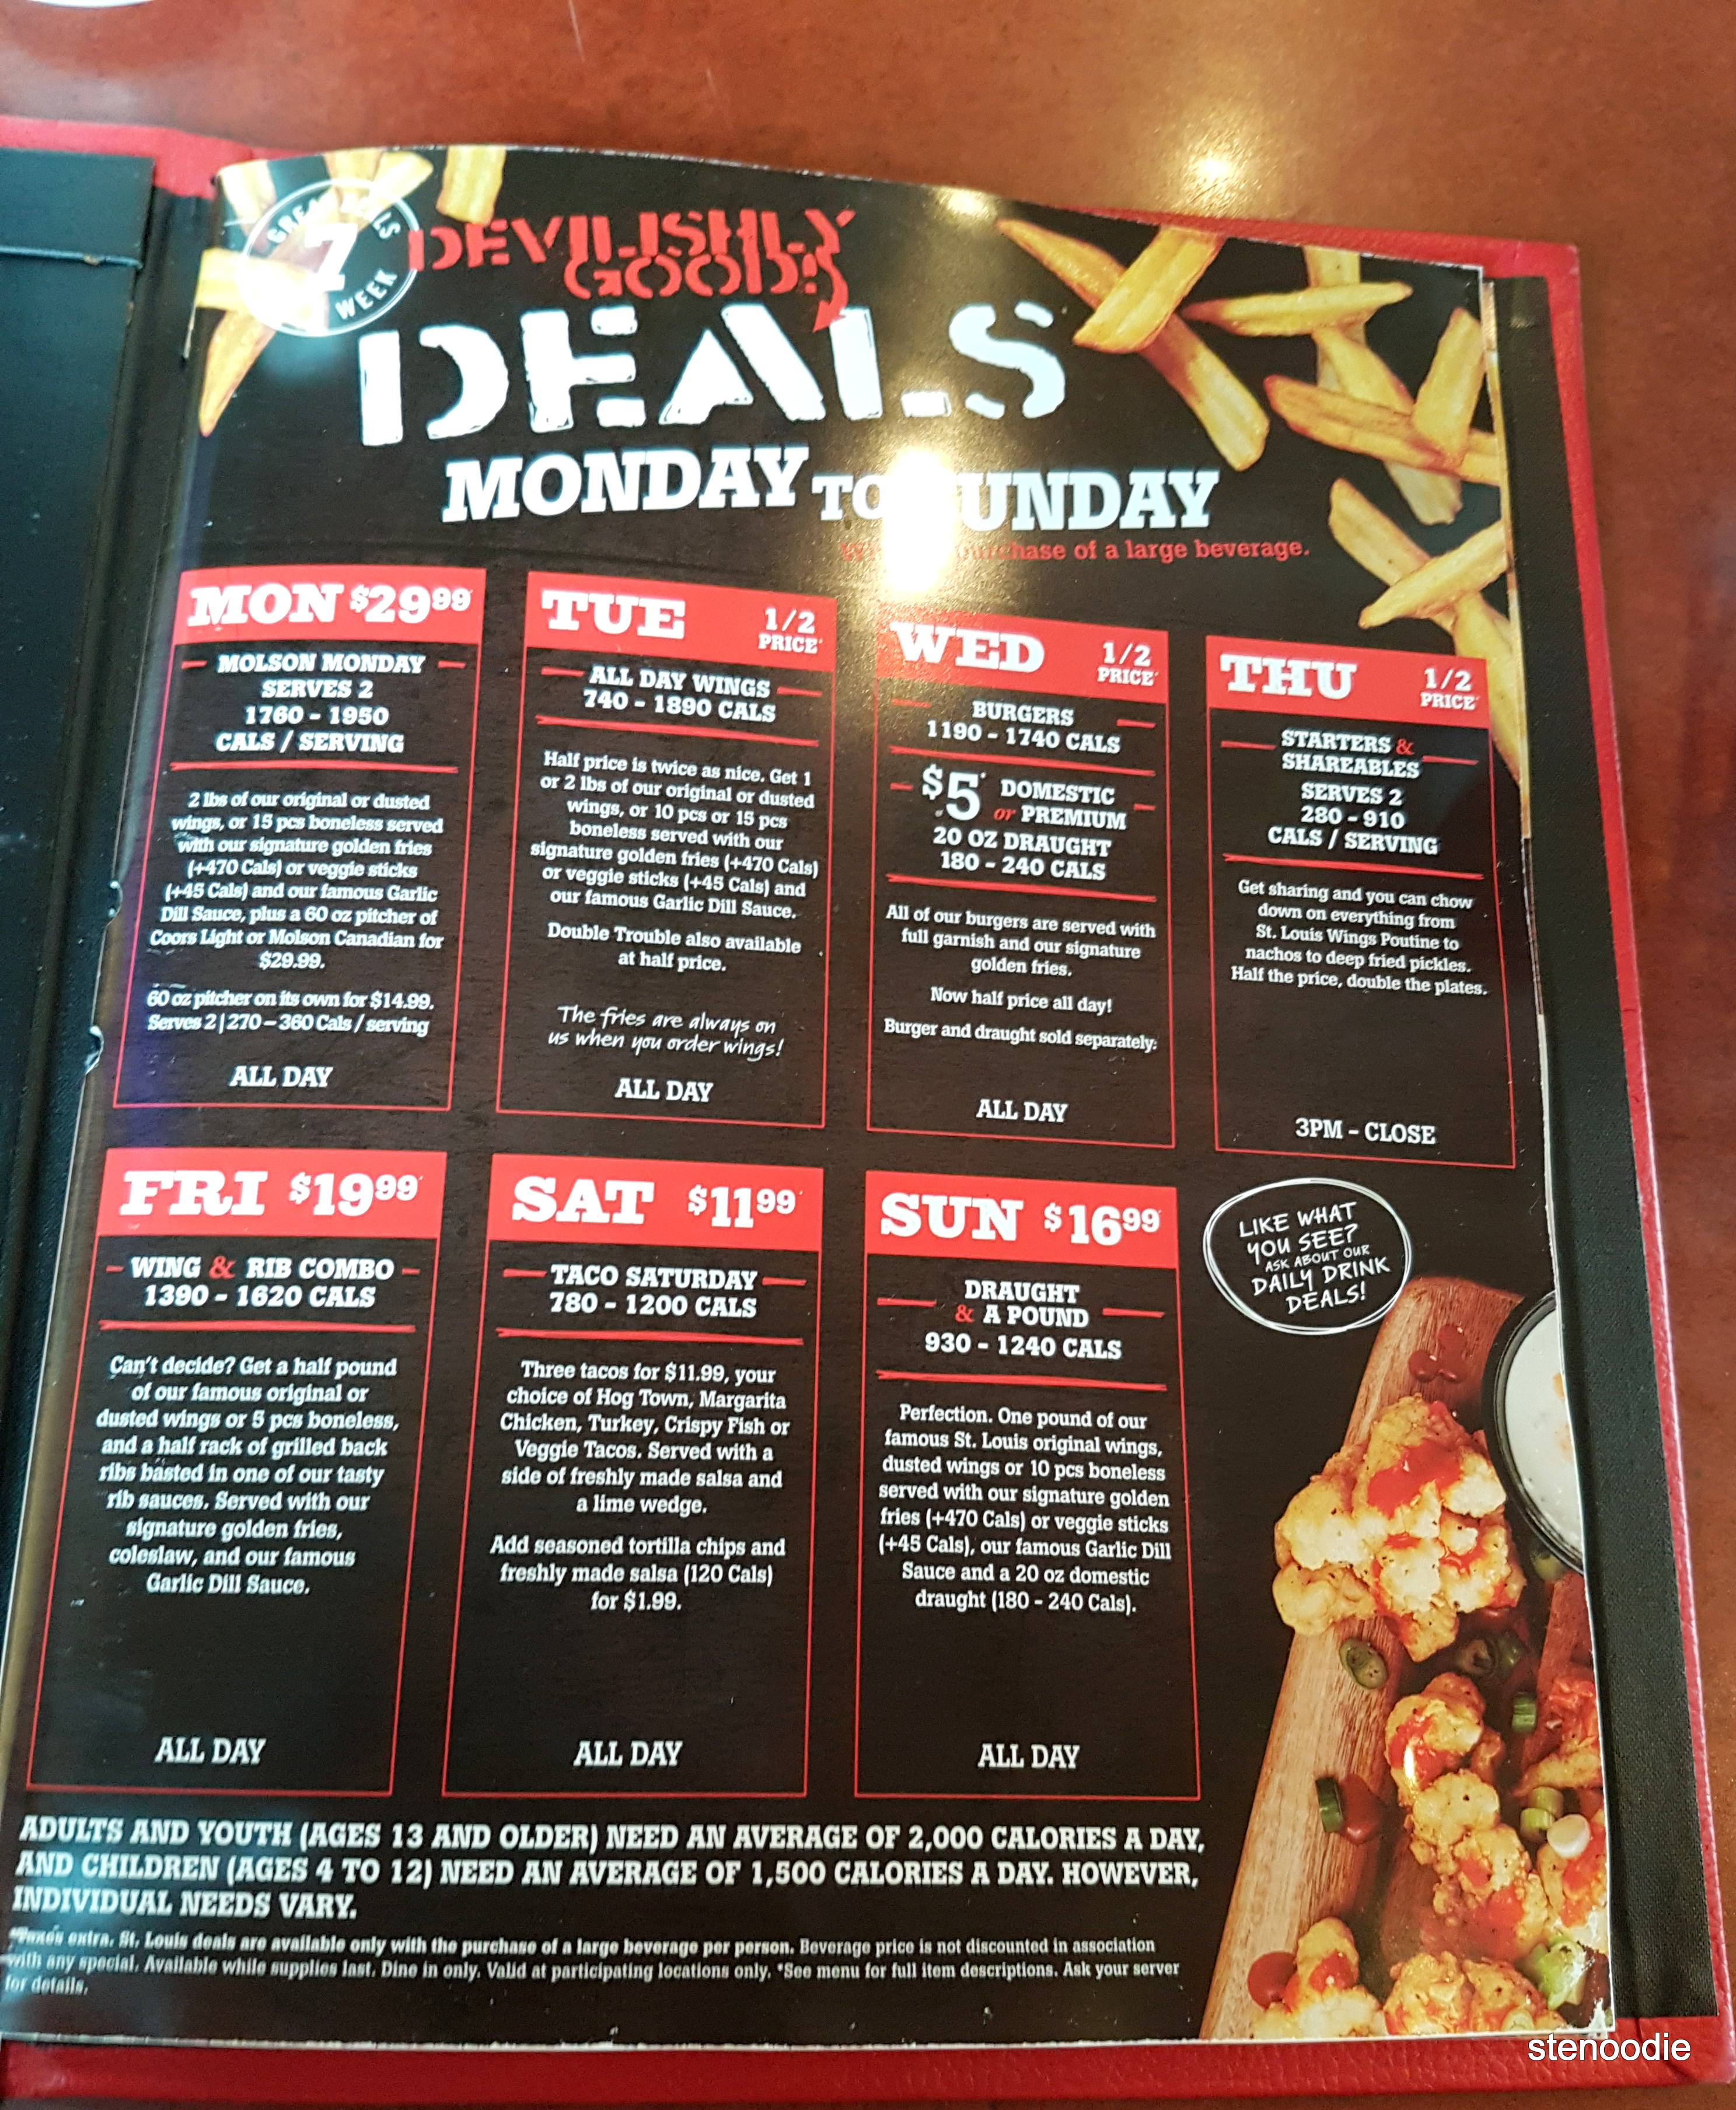 St. Louis Bar & Grill daily deals menu and prices